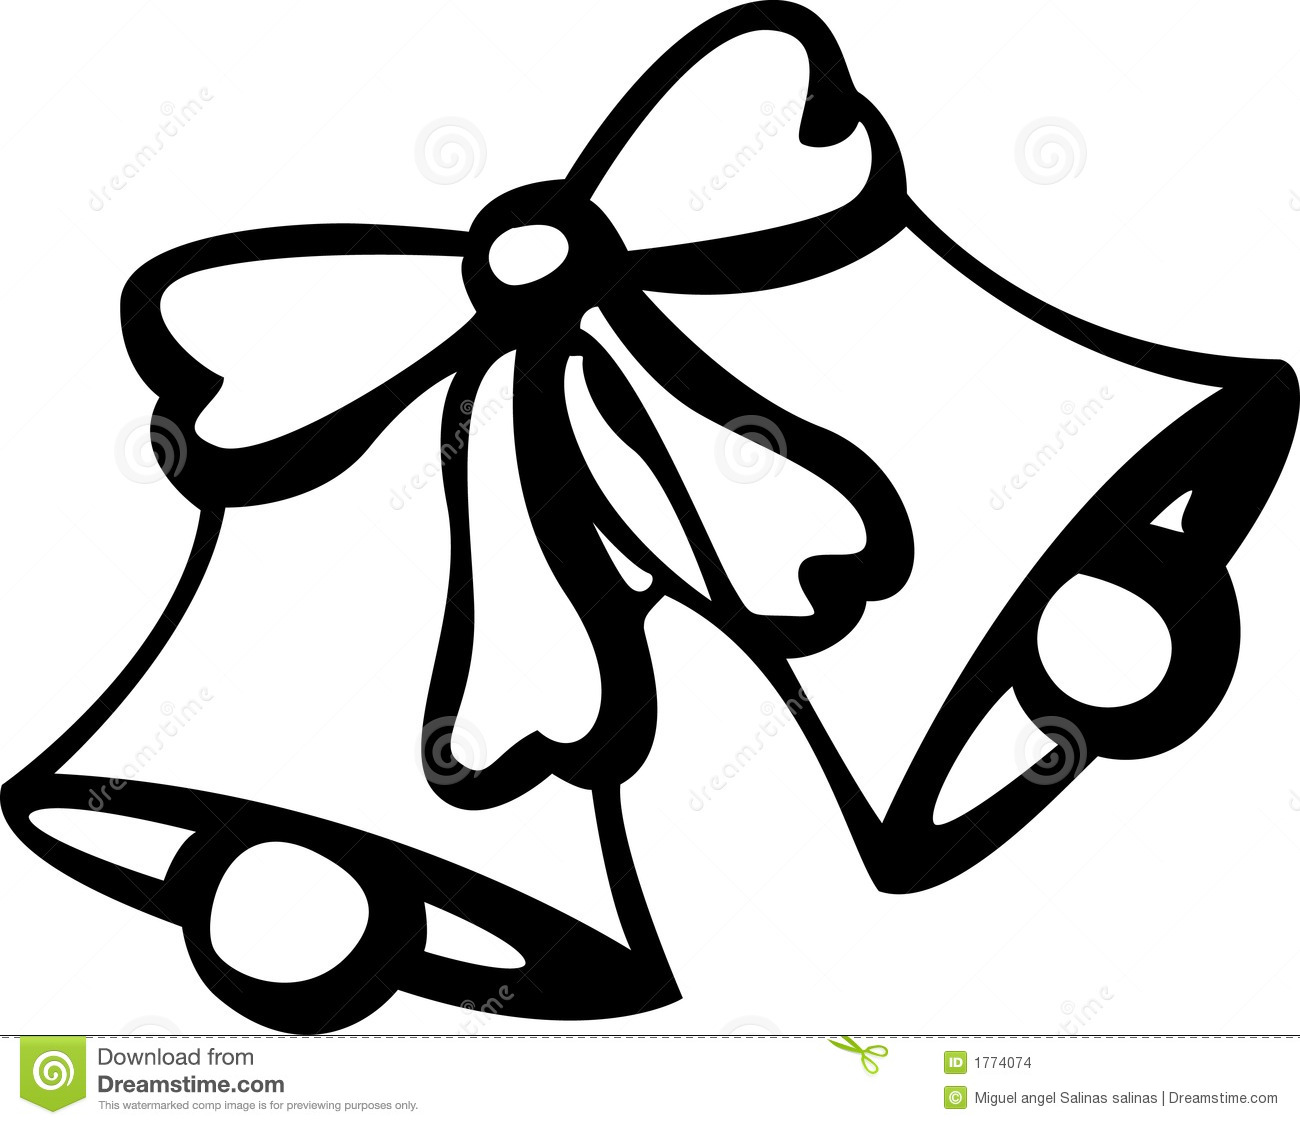 Black And White Illustration Of Two Decorated Bells With A Ribbon